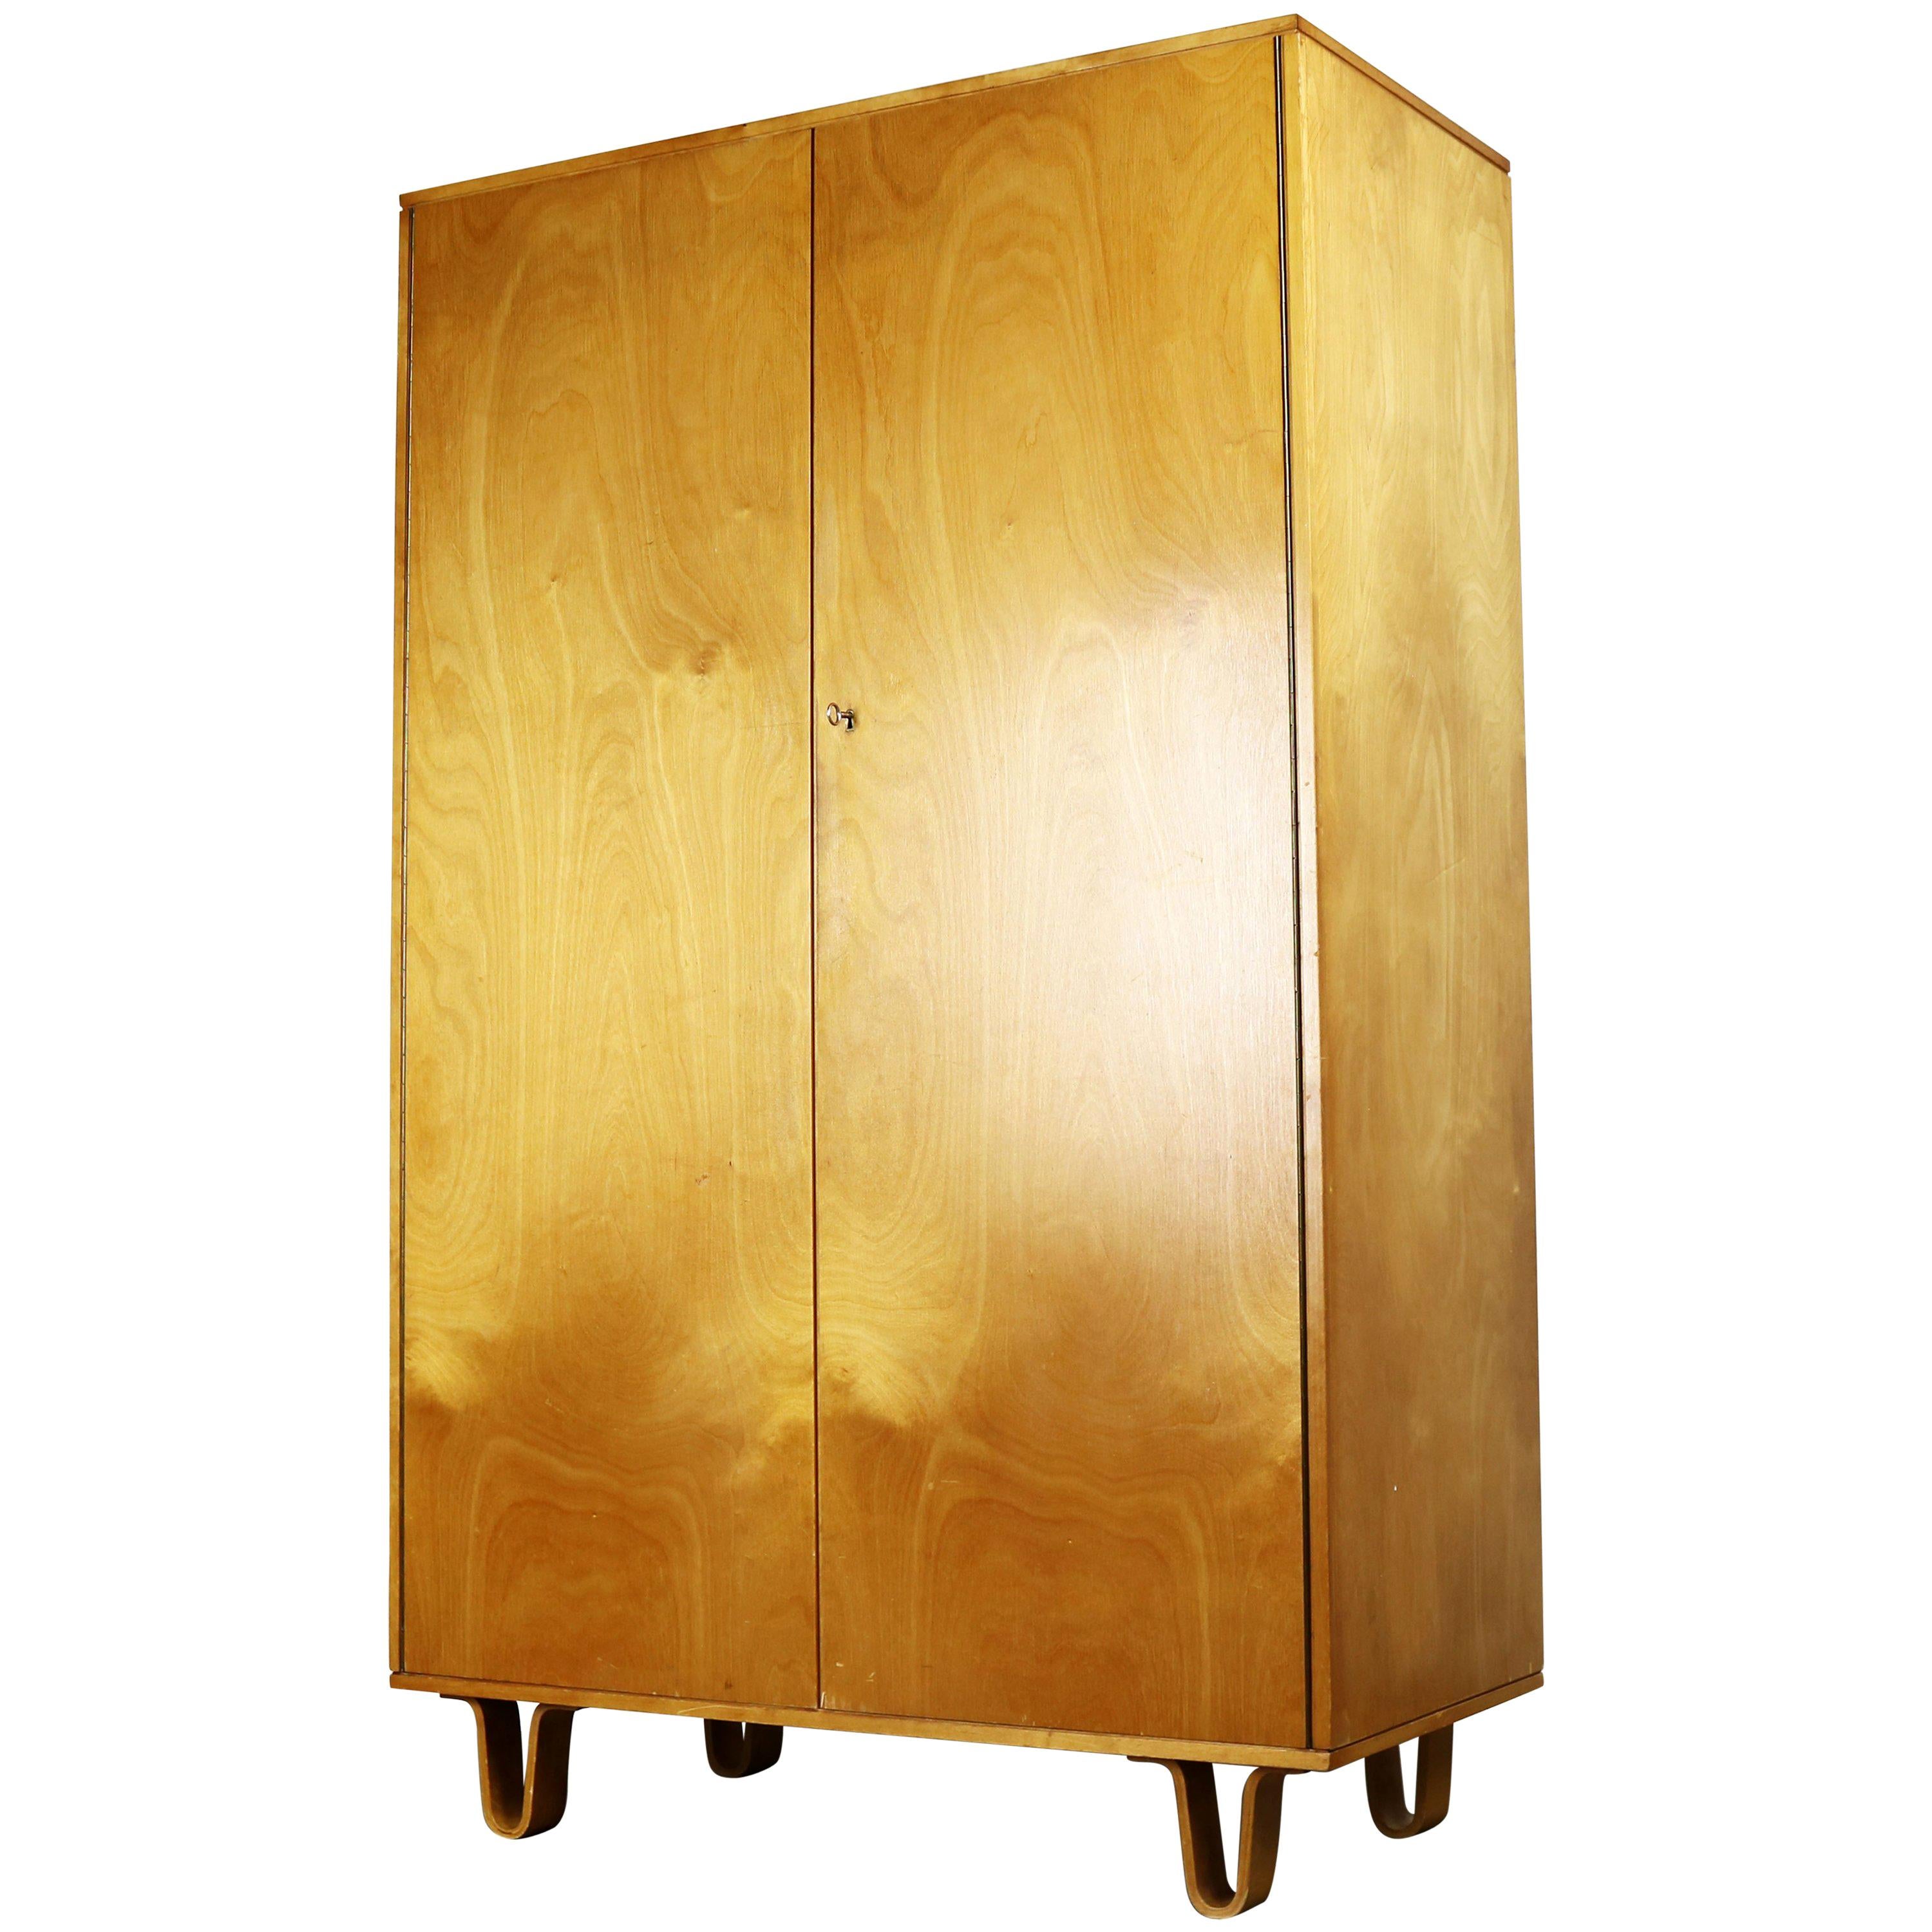 KB03 Birch Series Cabinet by Cees Braakman for UMS Pastoe, 1950s Yellow Blonde